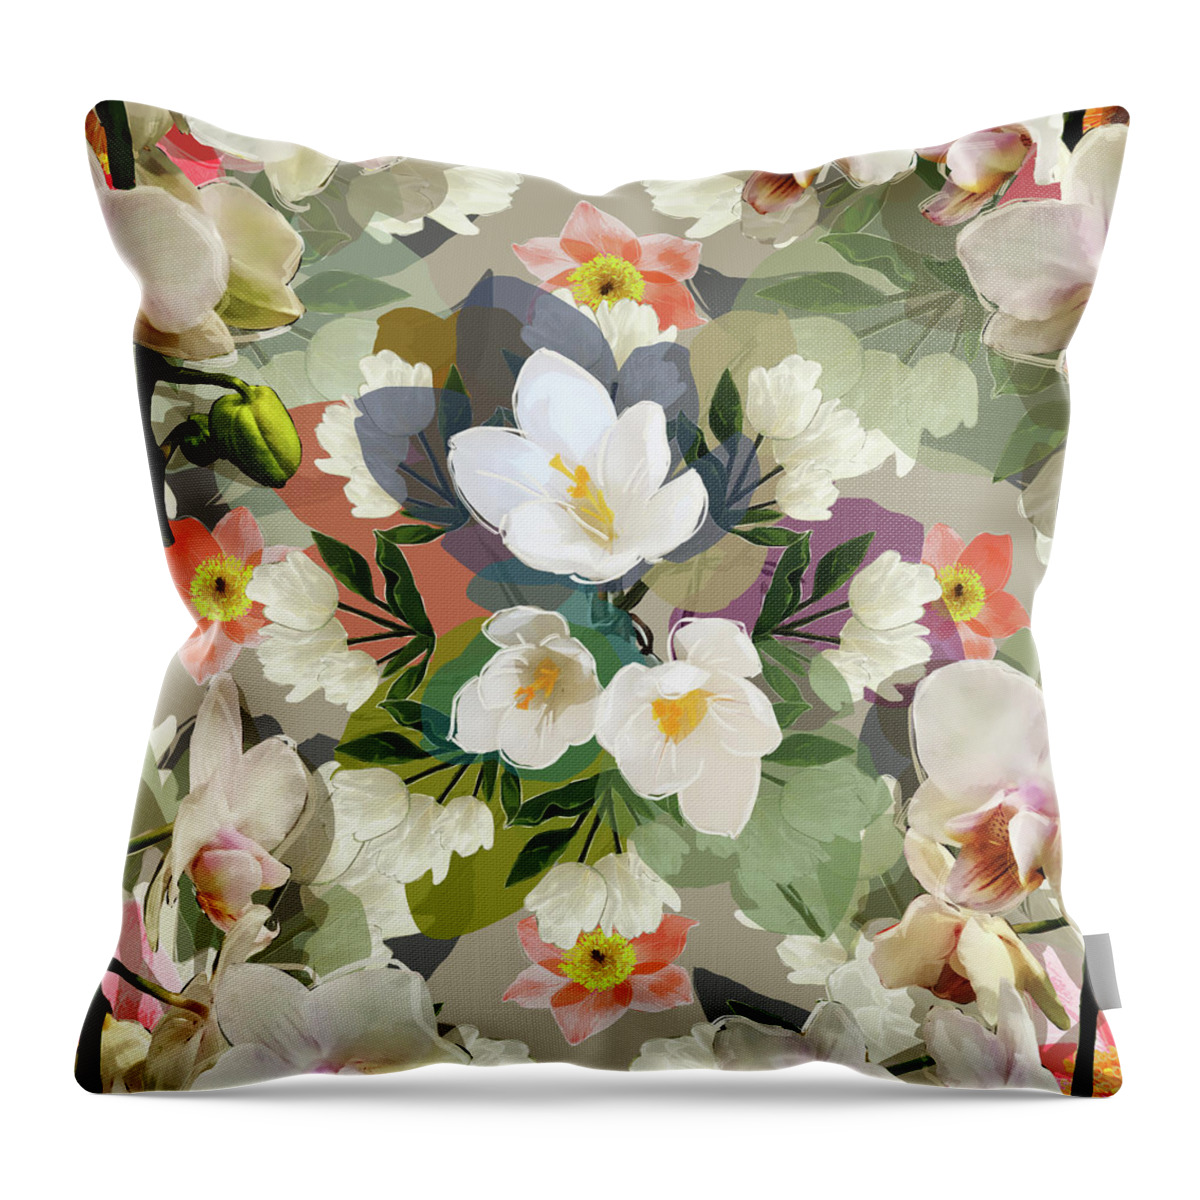 Pop Art Throw Pillow featuring the mixed media Orchid Flower Blossom by Big Fat Arts